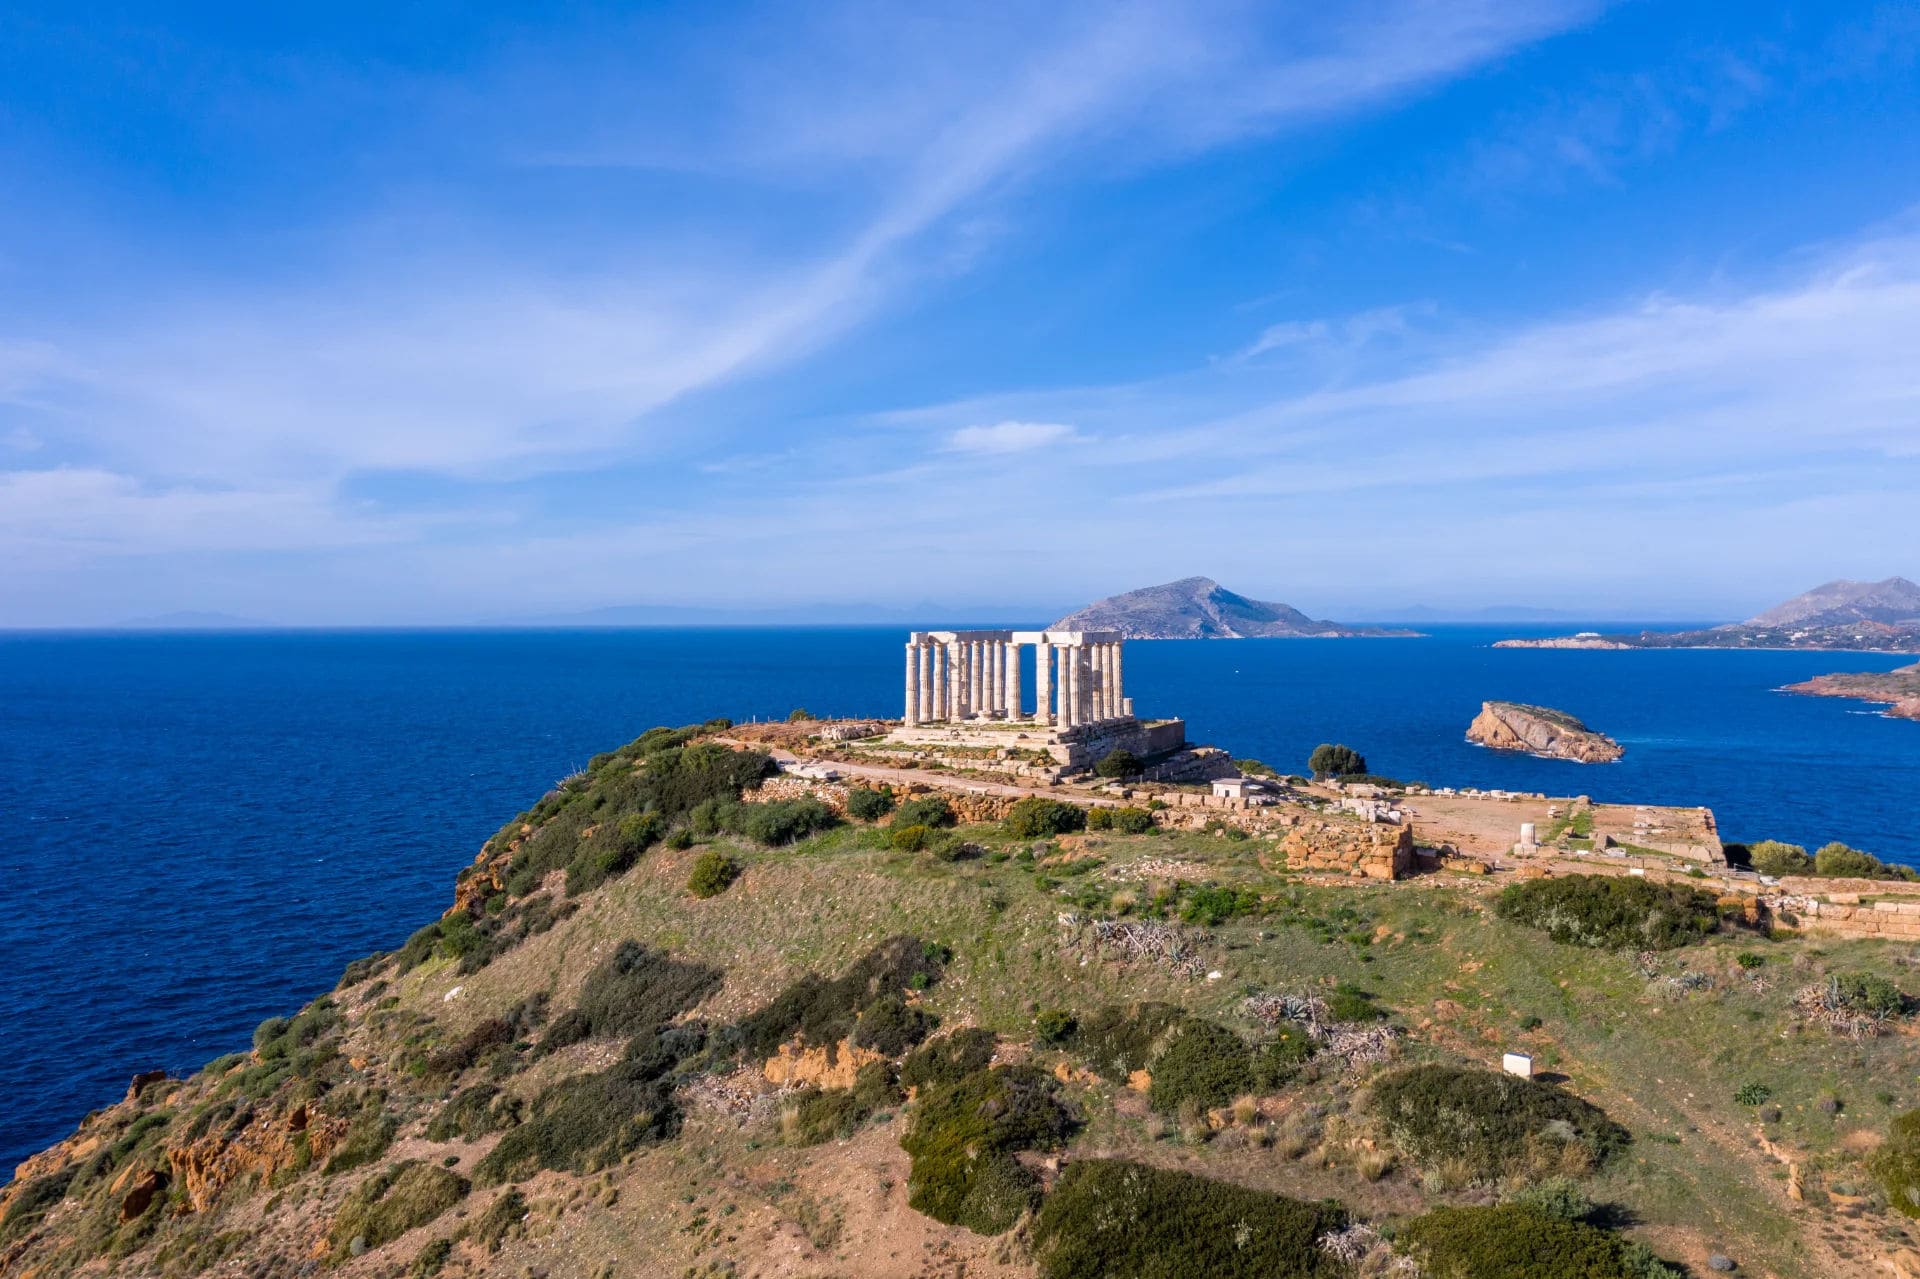 Aerial view of the ancient Temple of Poseidon located on a hill at Cape Sounion, Greece. The temple is surrounded by the bright blue Aegean Sea, with rocky islets and distant land masses under a clear, blue sky. The landscape is dotted with green shrubs and rocky paths.